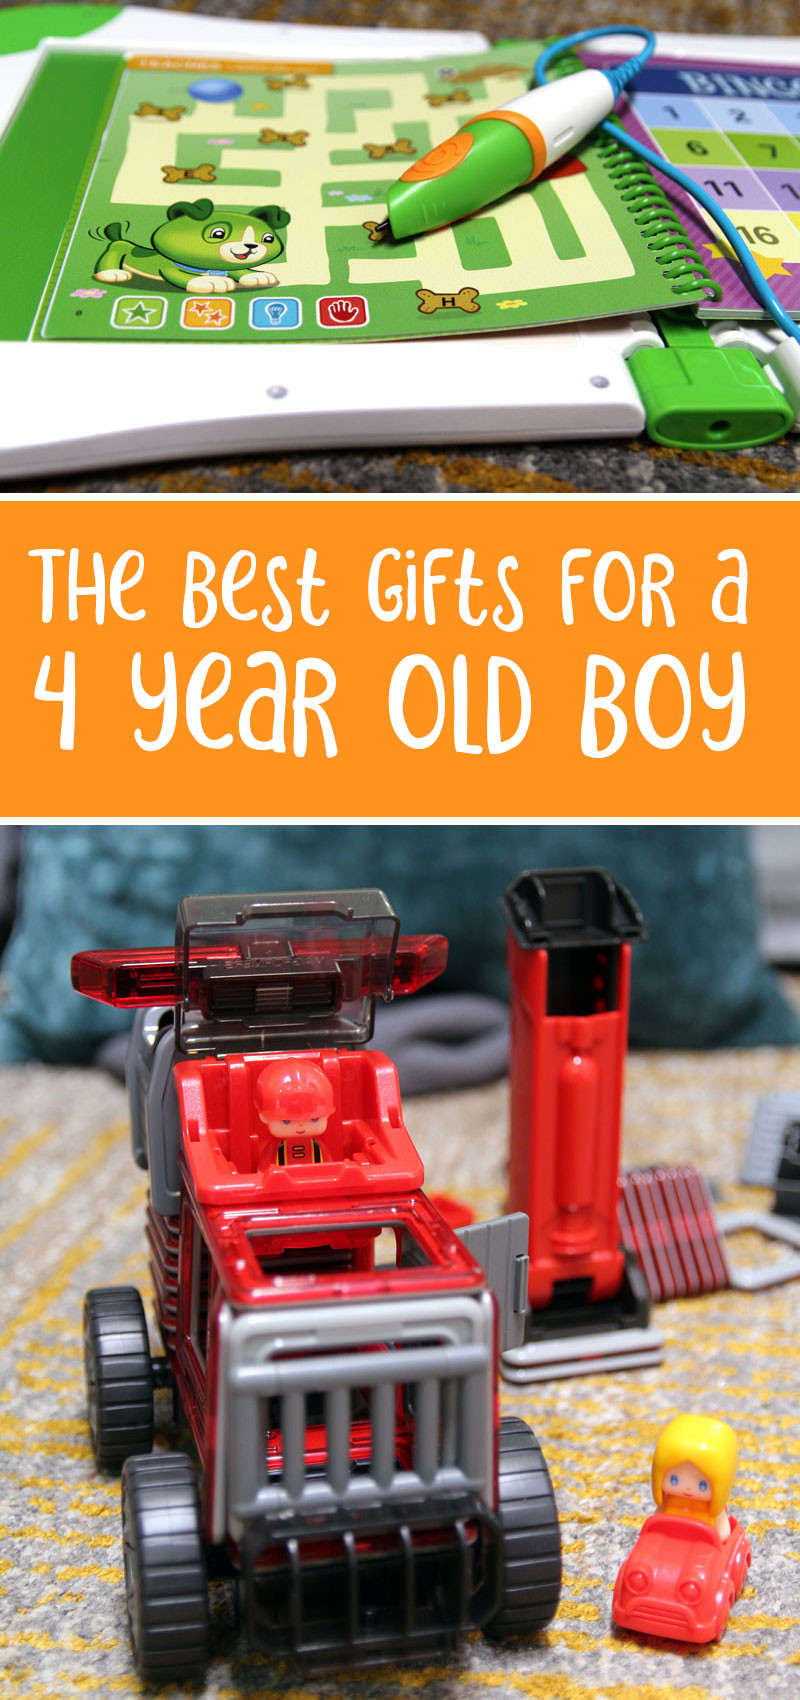 Outdoor Gift Ideas For Boys
 3 Year Old Birthday Gift Ideas Birthday ts for 3 year